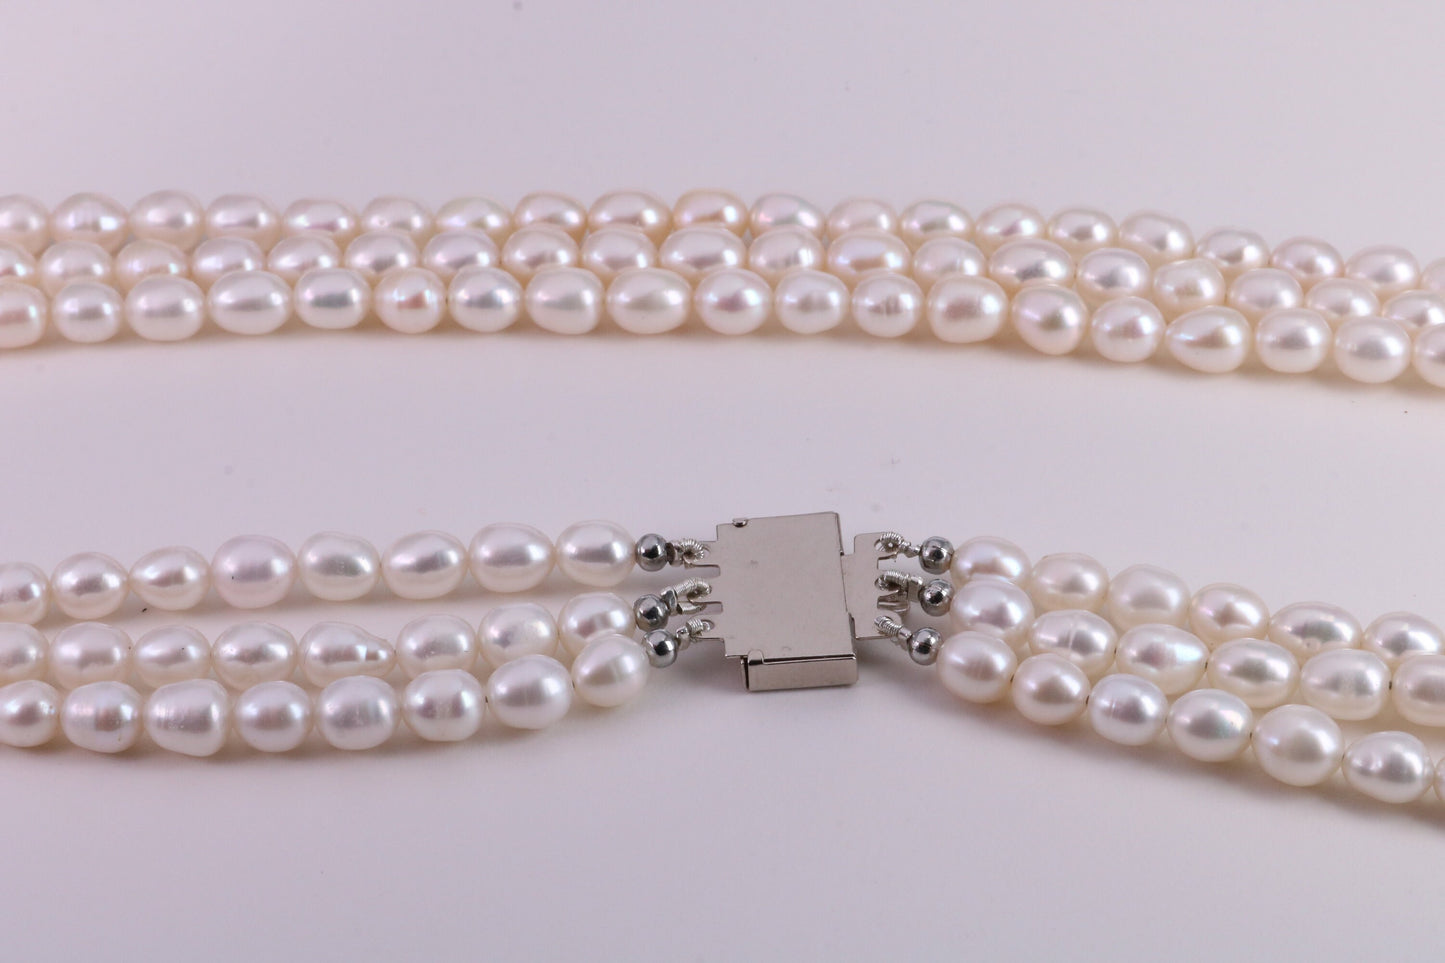 Three Strand Natural 7 mm Oval Shaped Pearl Necklace set in Silver, Three Strands Measures 16, 18 and 20 inches Long